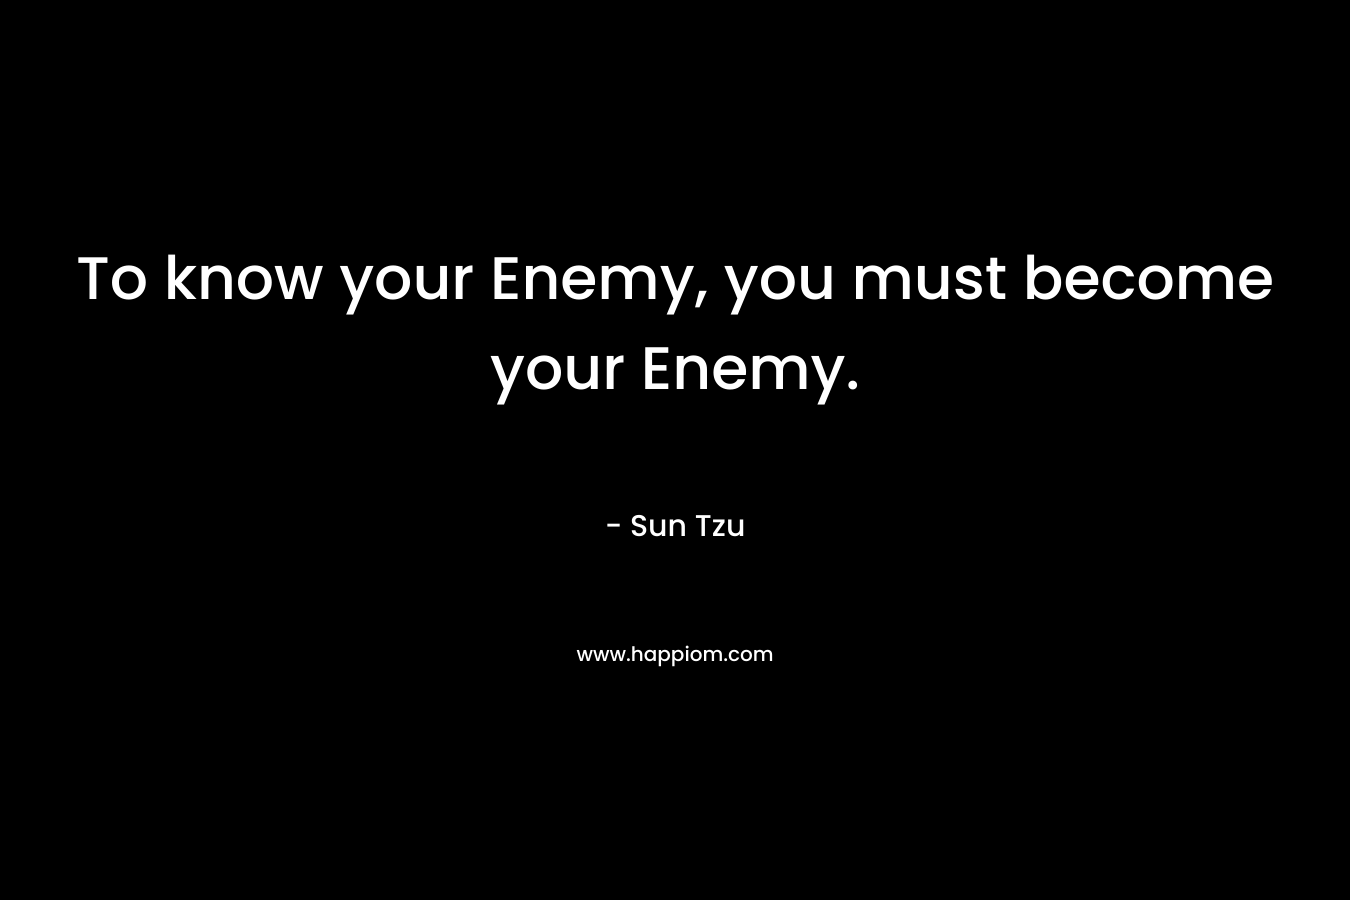 To know your Enemy, you must become your Enemy.